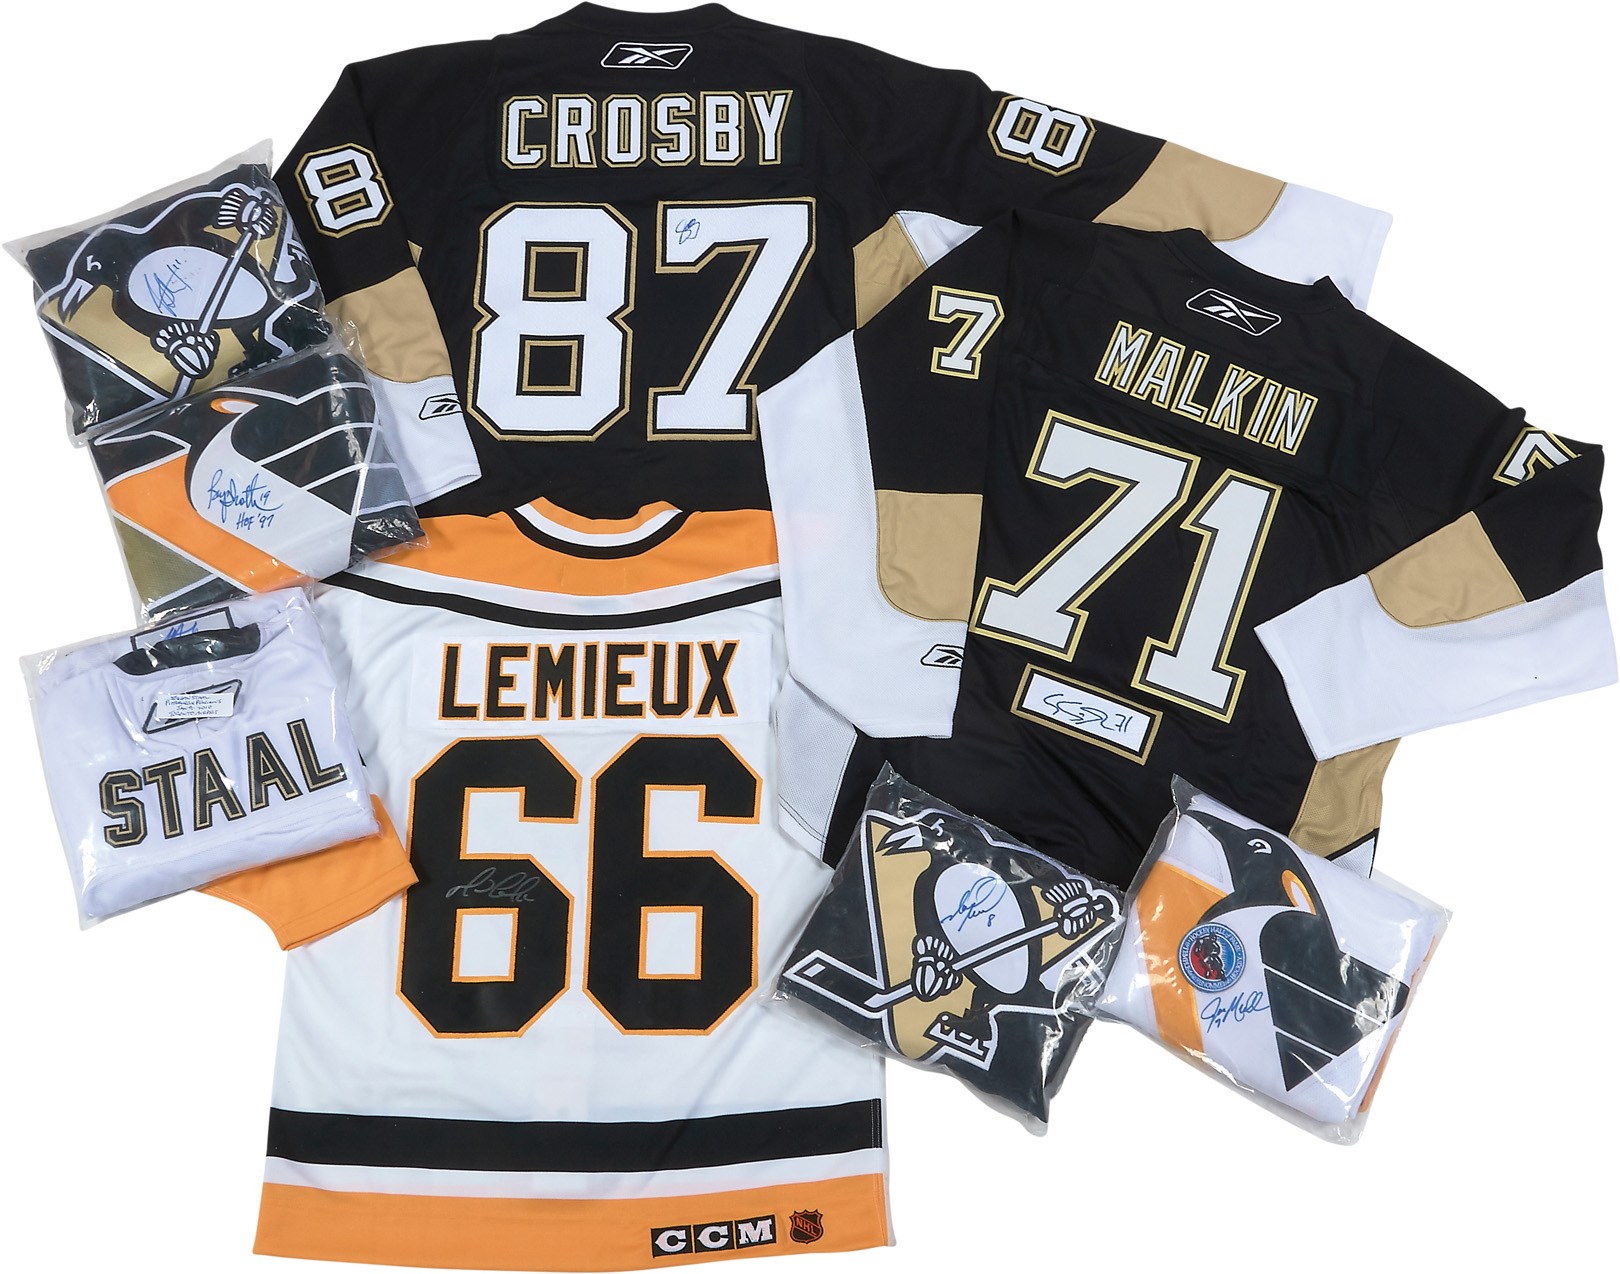 Pittsburgh Penguins Greats Signed Jerseys w/Crosby & Lemieux (8)